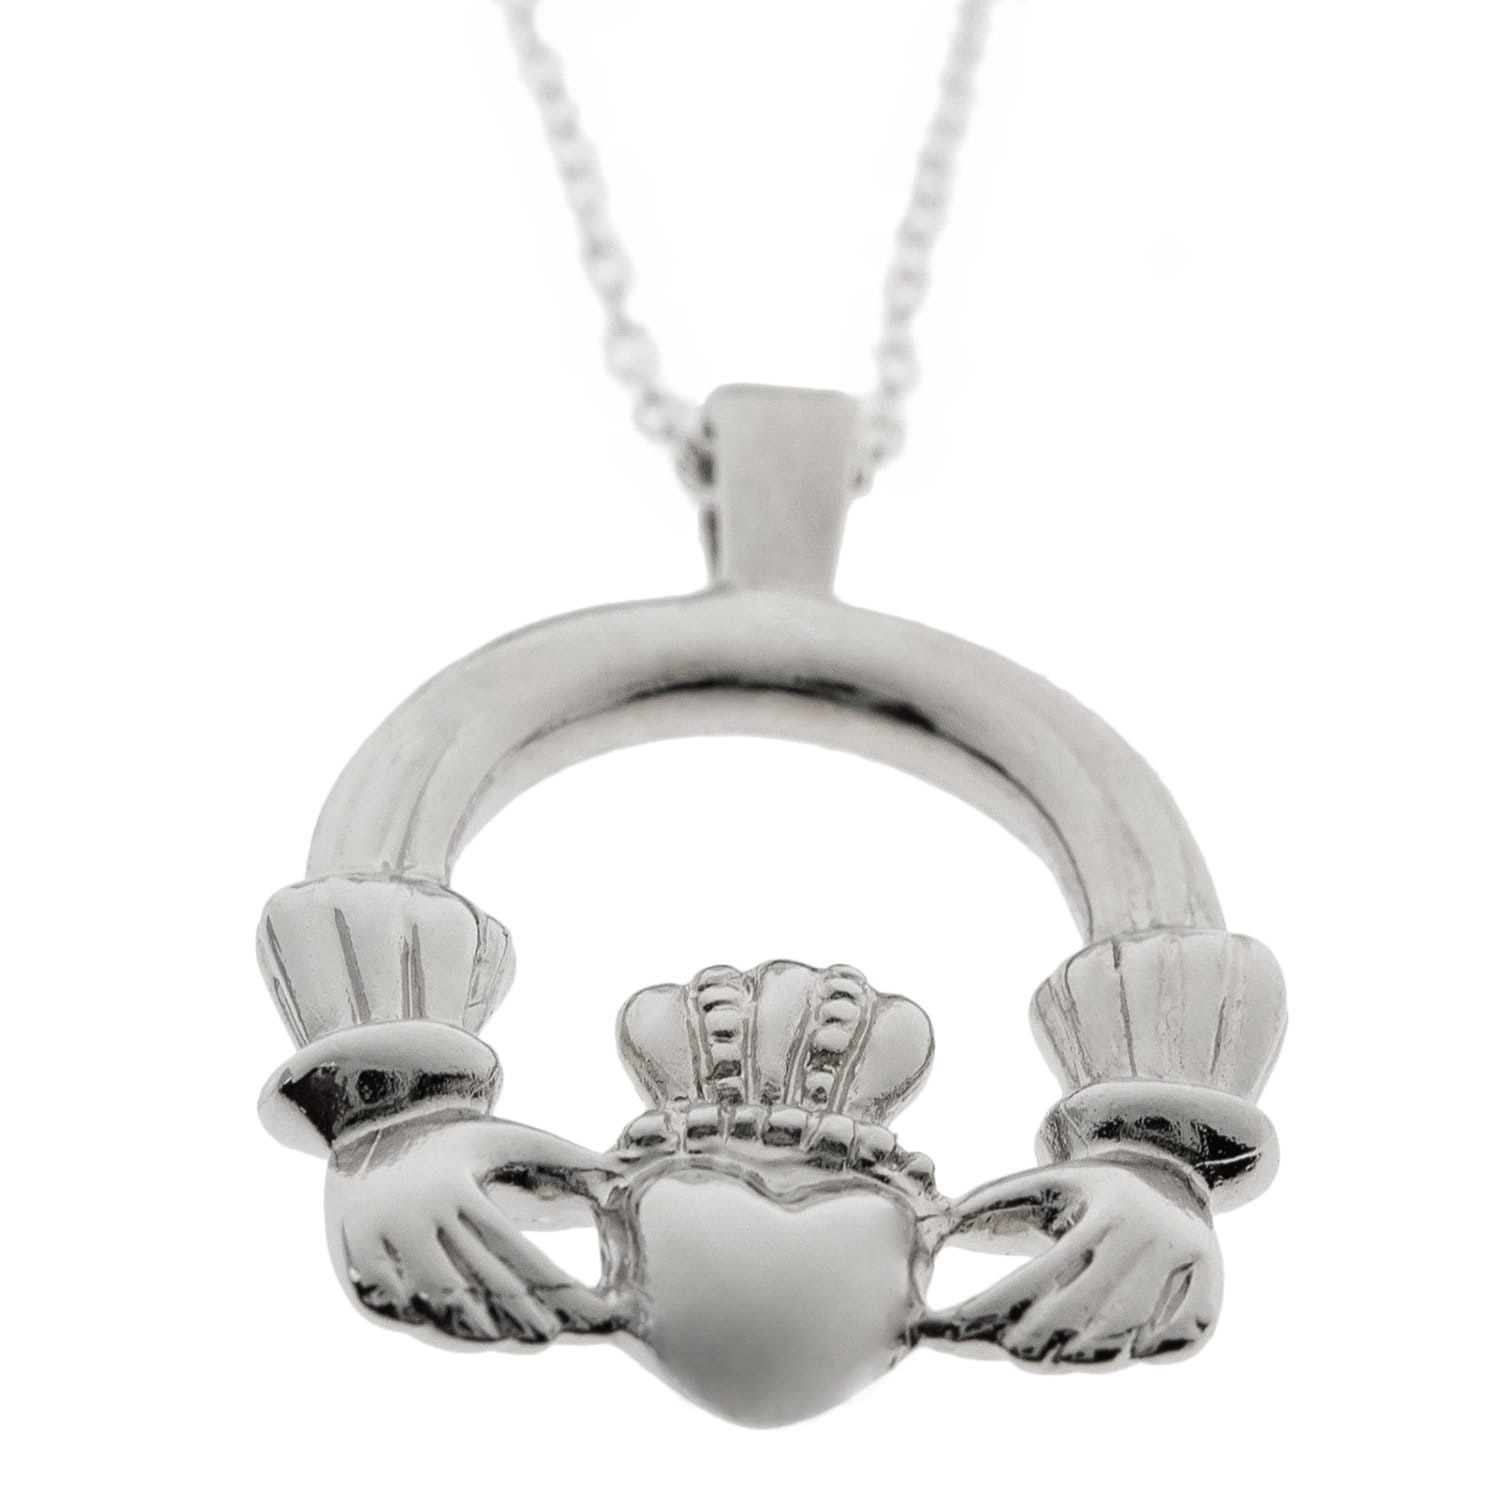 Vintage Claddagh Necklace 18k White Gold Silver Made in the USA N1722 - Limited Stock - Never Worn